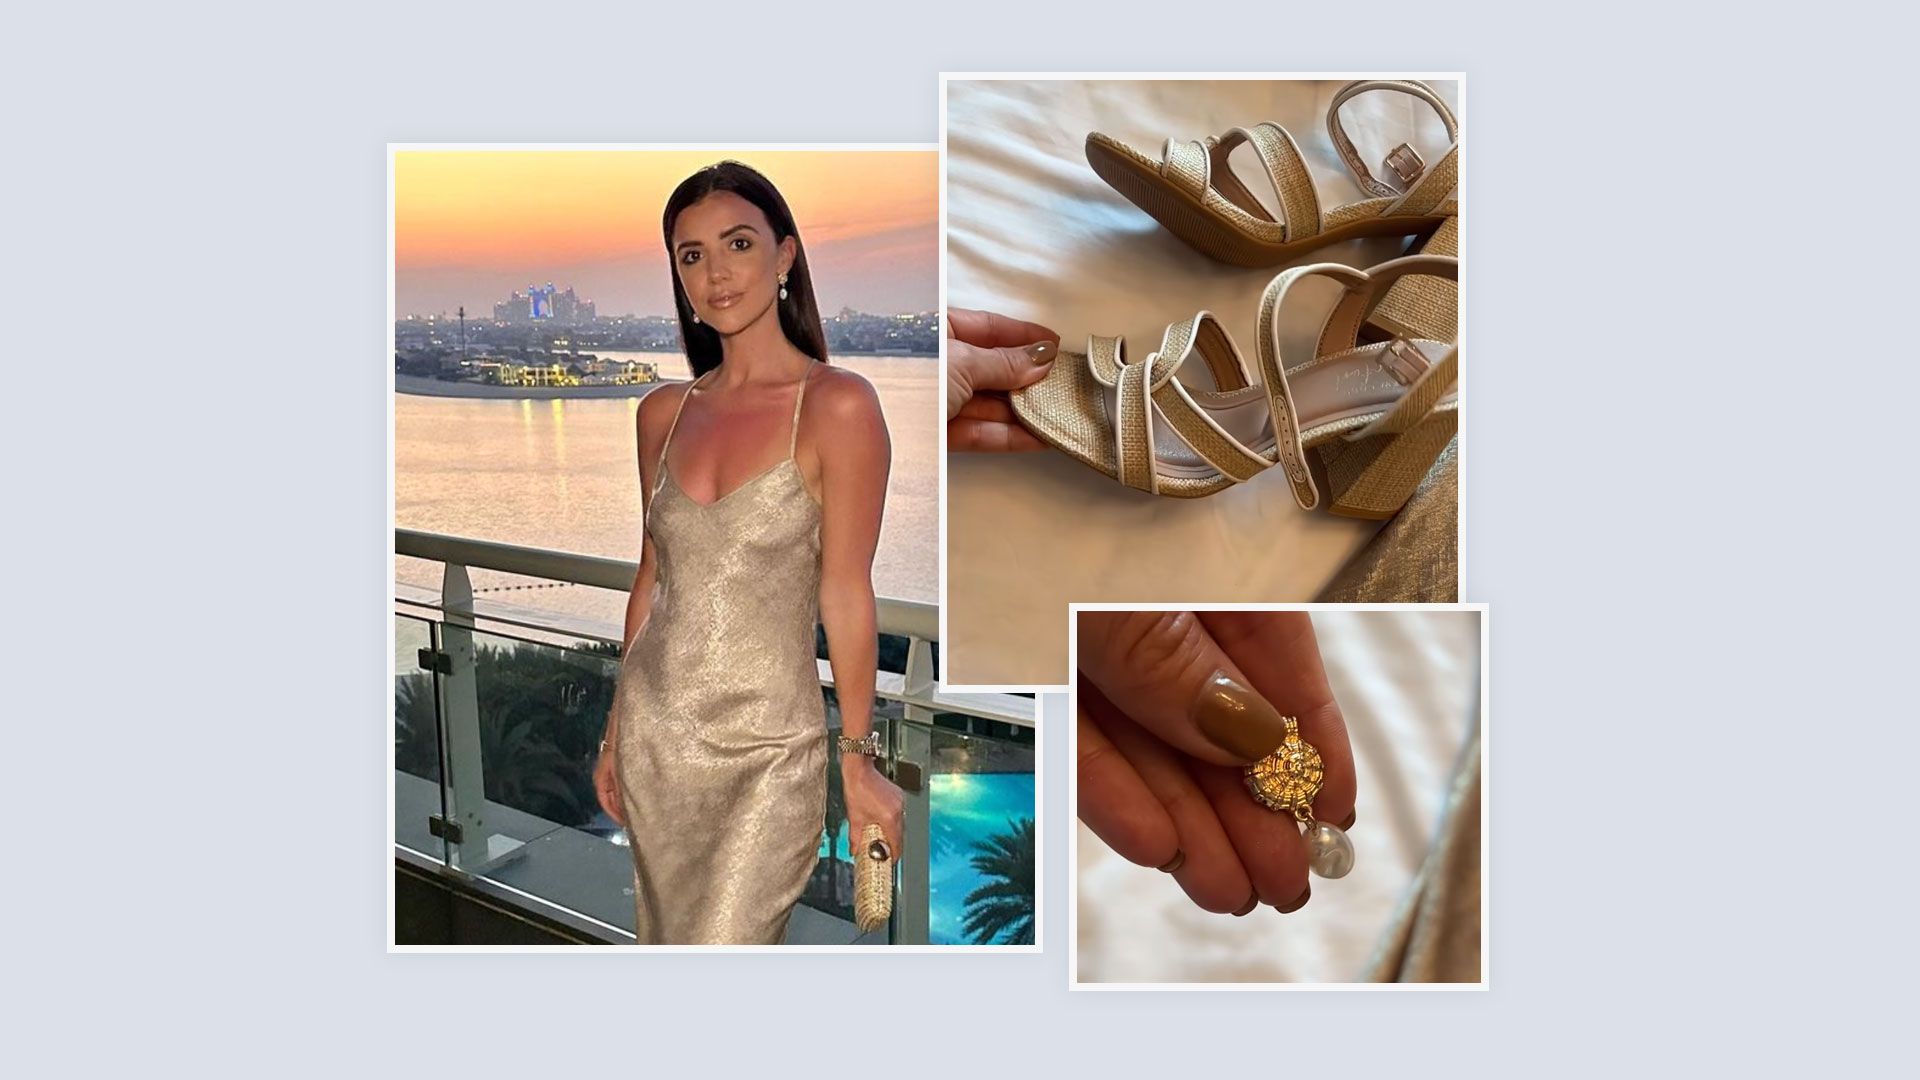 Lucy Meck is a golden goddess in 'classy' £32.99 New Look dress & she's giving me holiday inspiration with the accessories too